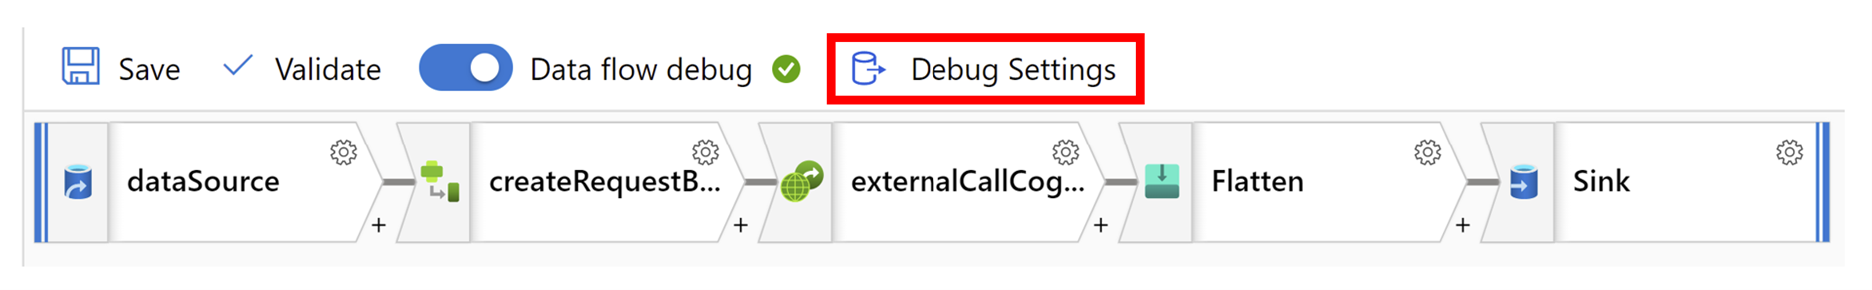 Screenshot of the Debug settings button on the top banner of the screen to the right of debug button.